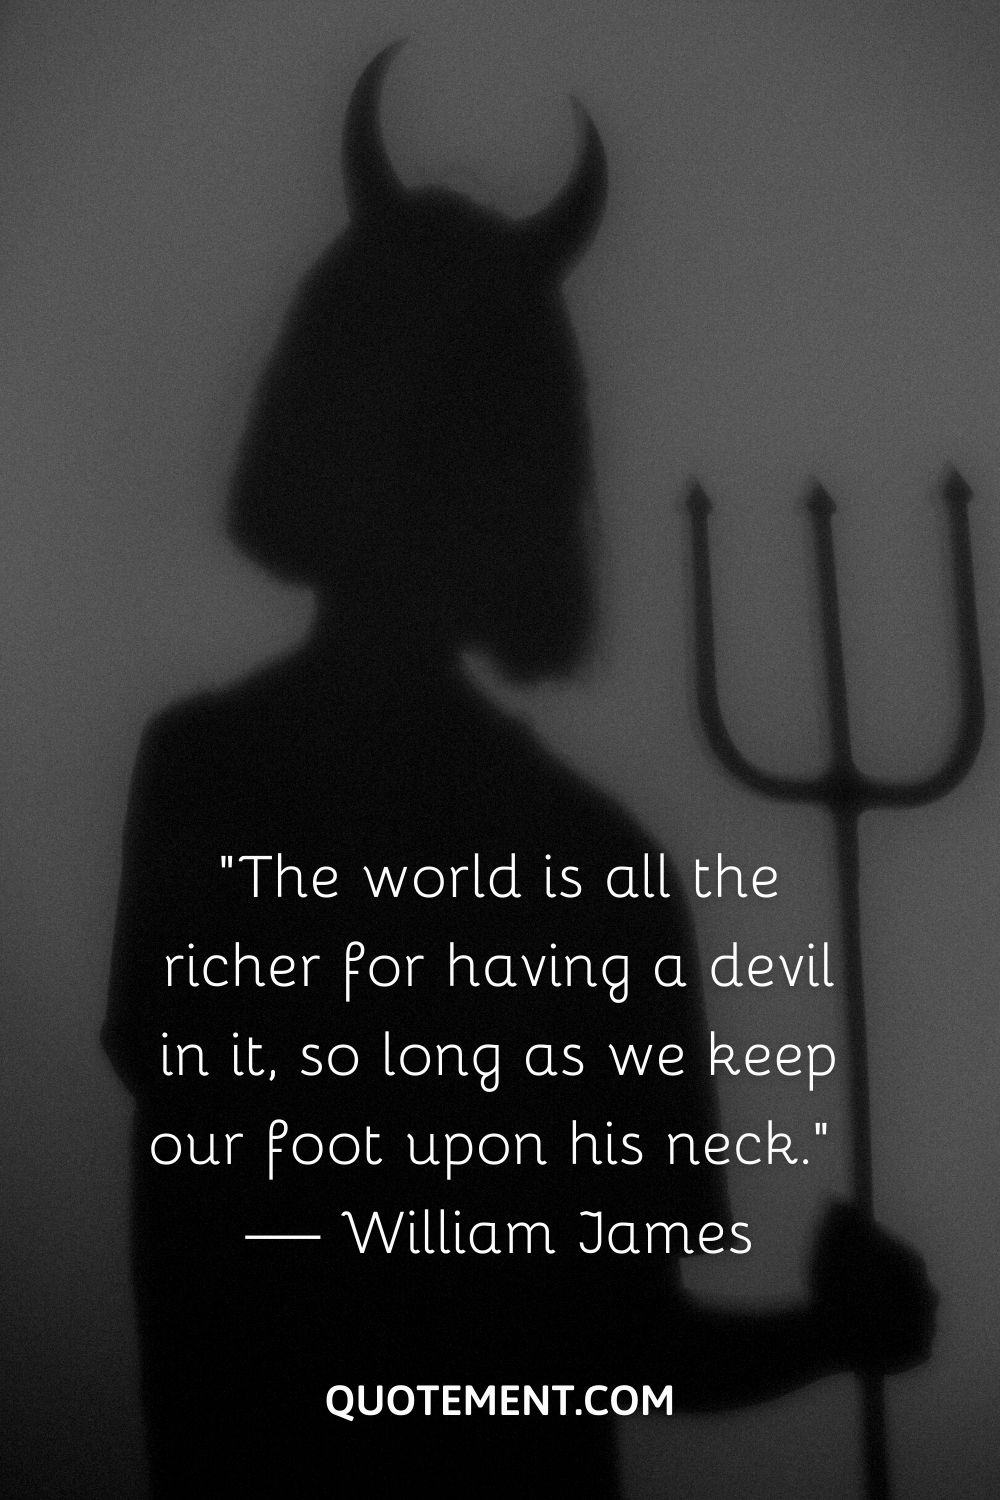 “The world is all the richer for having a devil in it, so long as we keep our foot upon his neck.” — William James